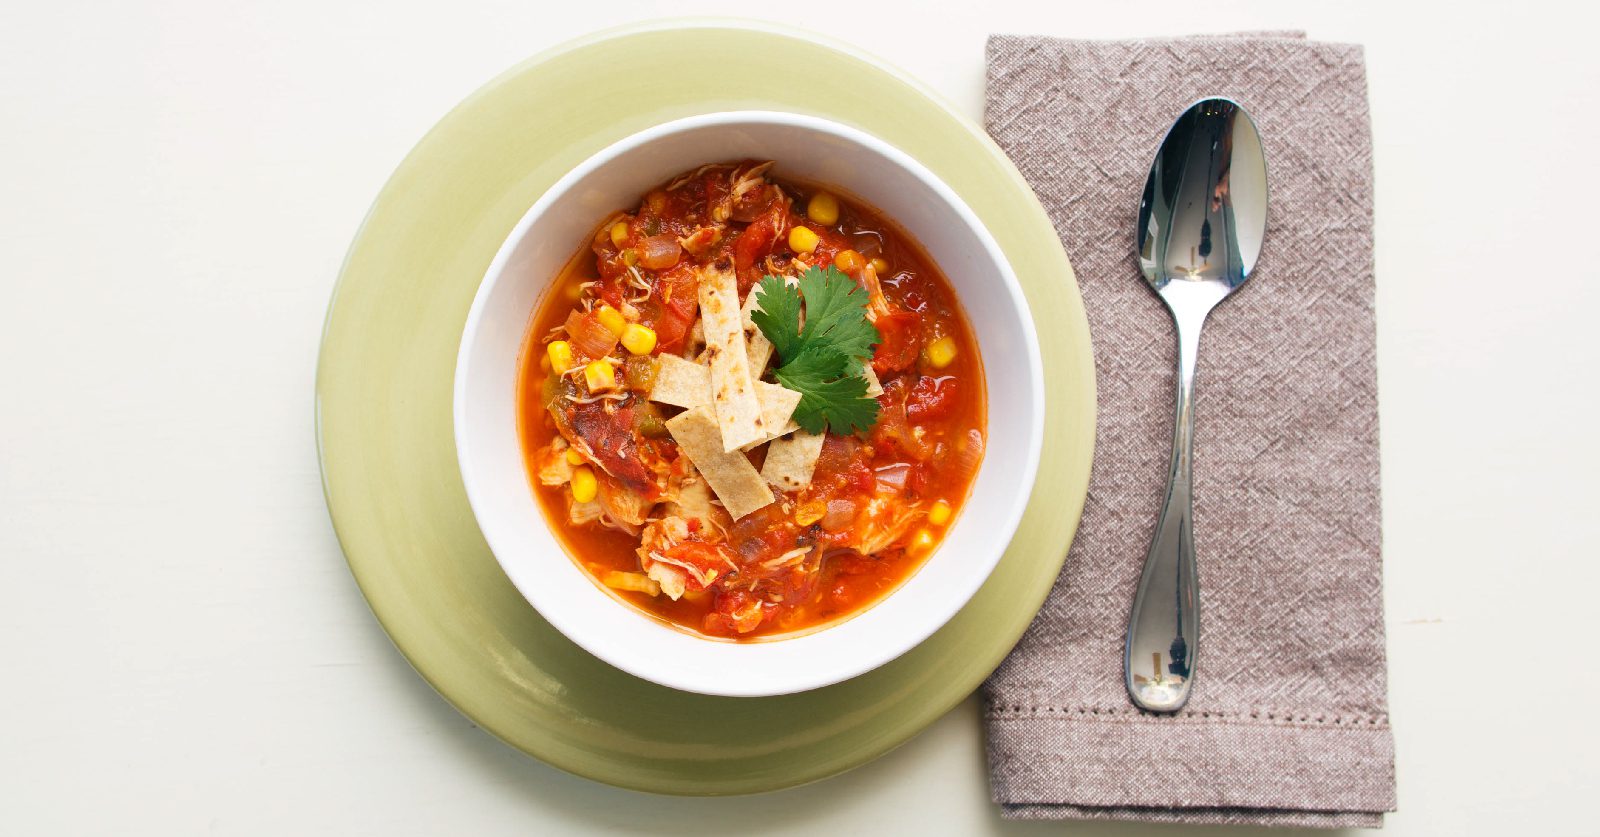 Our last dish on the list is a slow cooker version of a Tex-Mex favorite, Chicken Tortilla Soup!